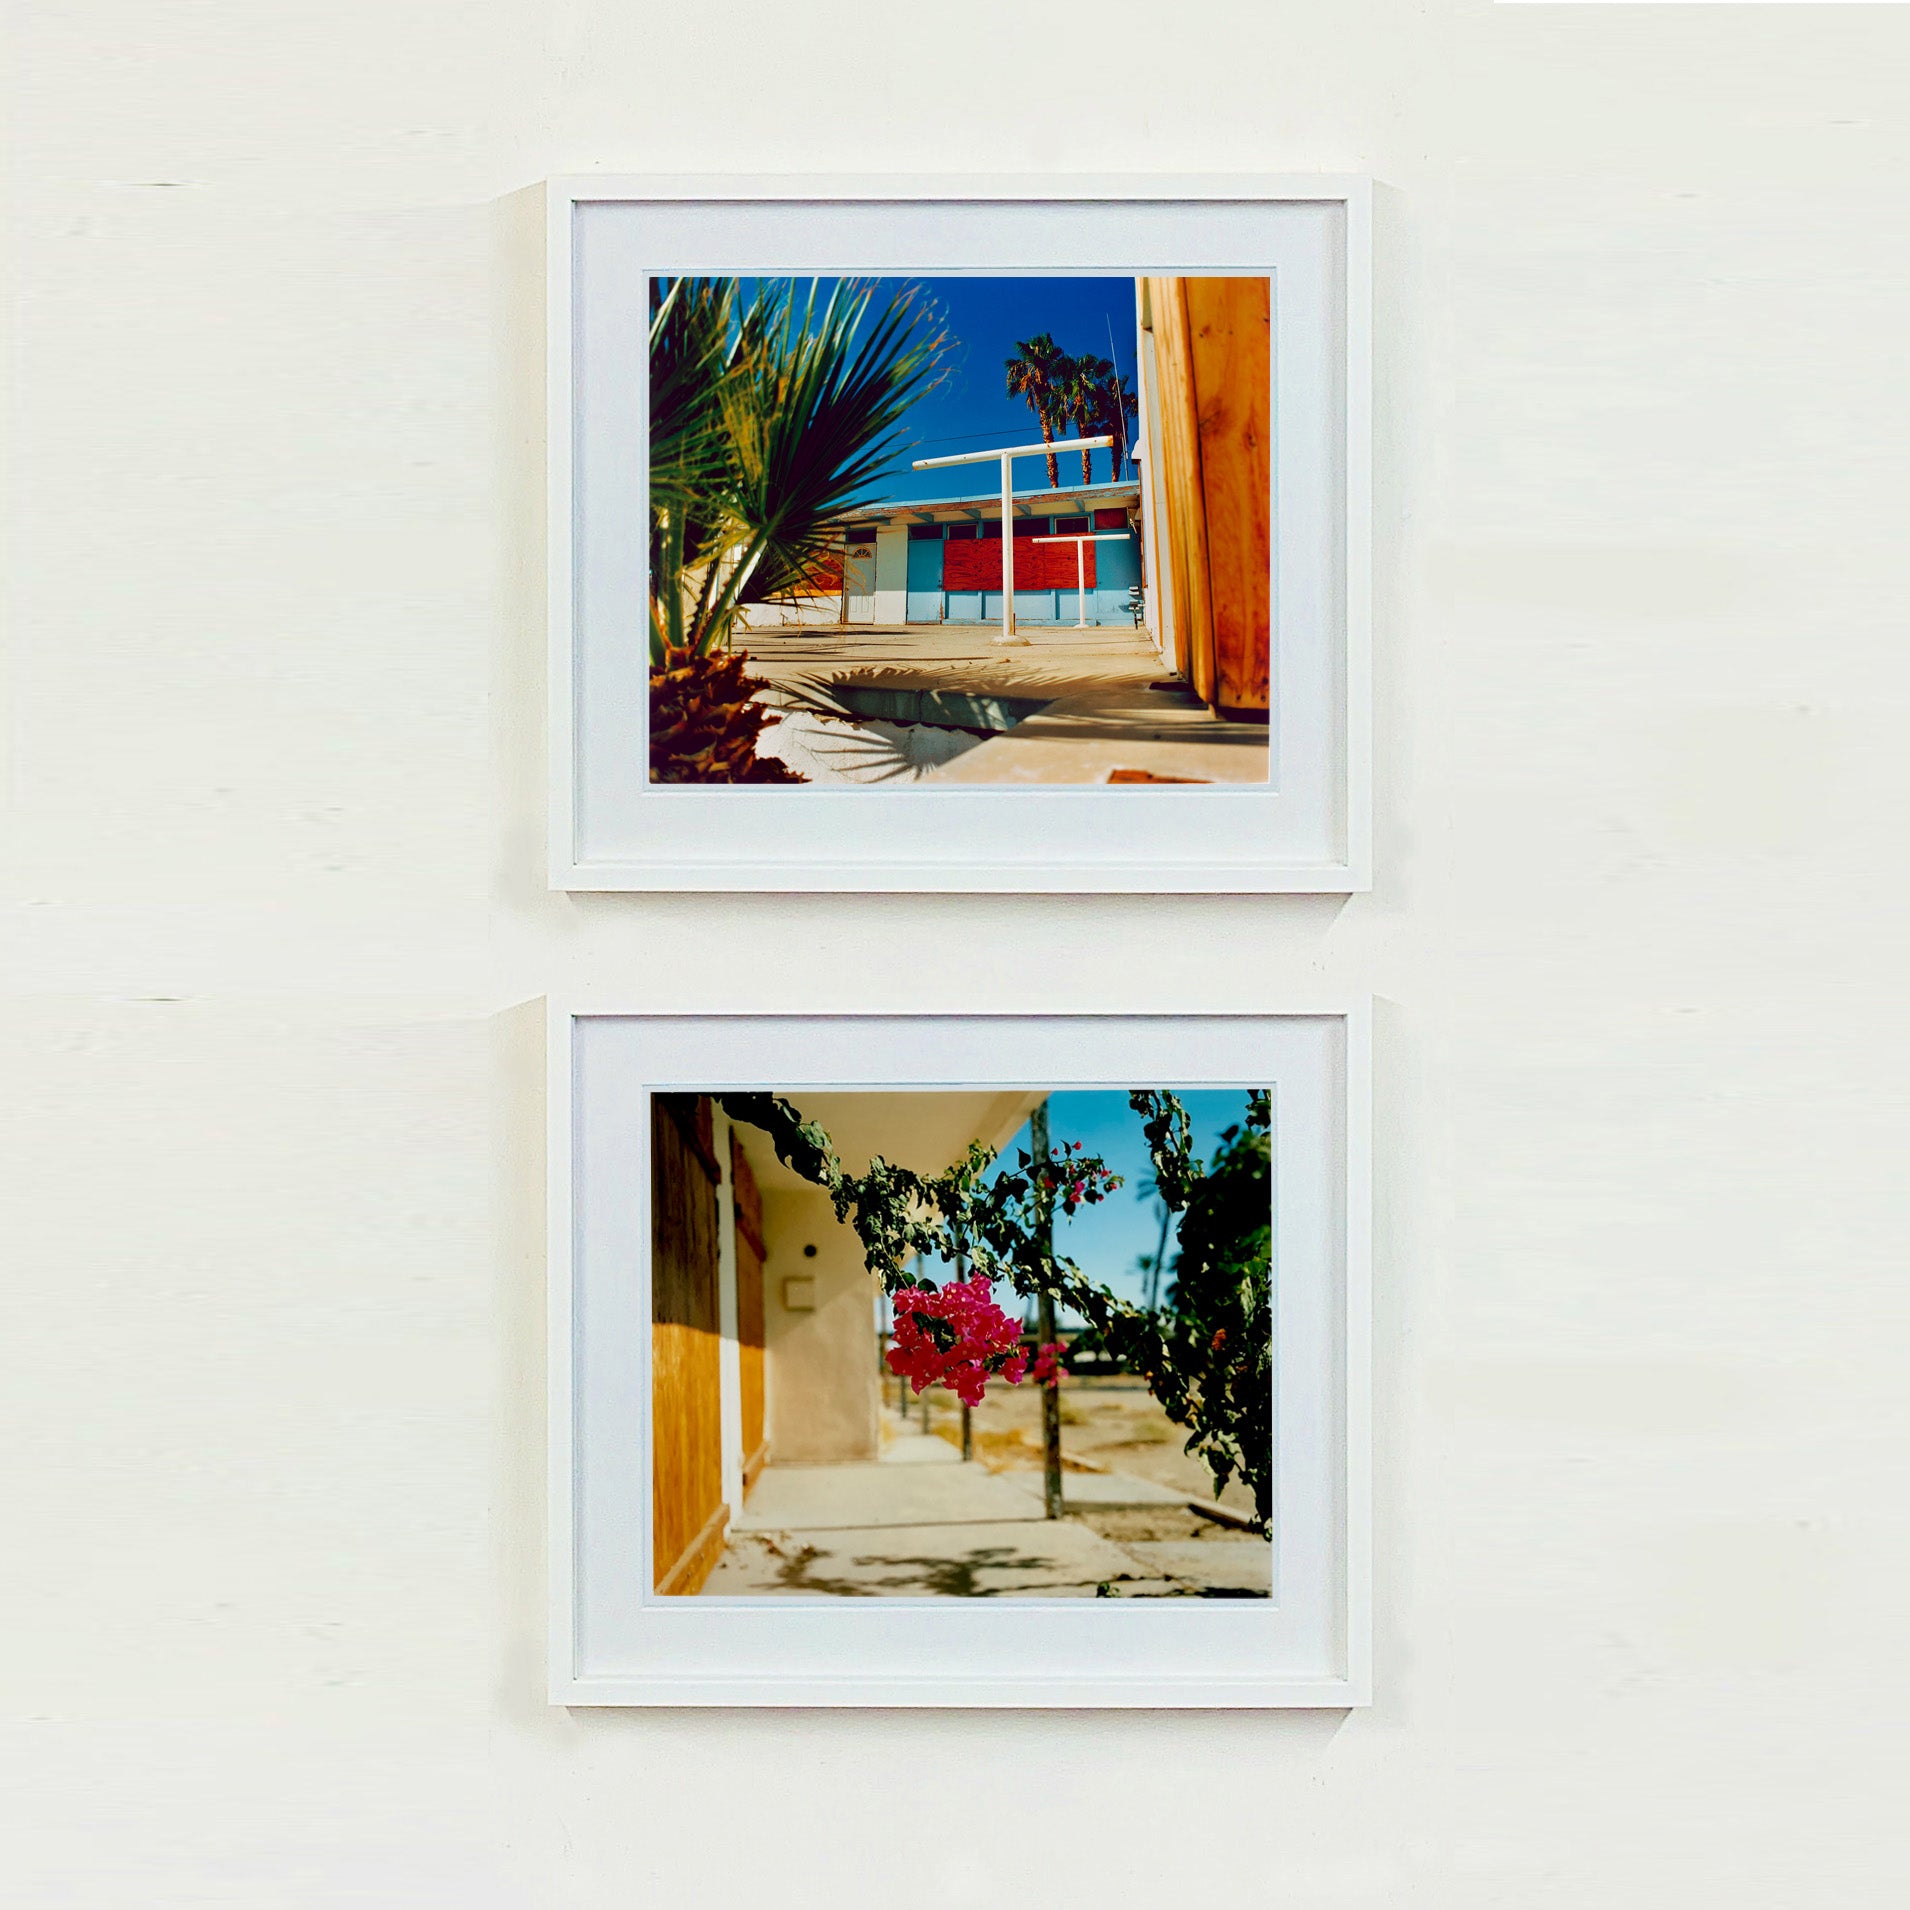 Two white framed photographs by Richard Heeps. The top photograph is of a colourful but derelict vintage motel sitting in the blue Californian sun. Palm trees appear behind and to the side. The bottom photograph has the motel room doors on the left hand side over top is the porch and in the centre of the photo hangs a beautiful pink bougainvillea.